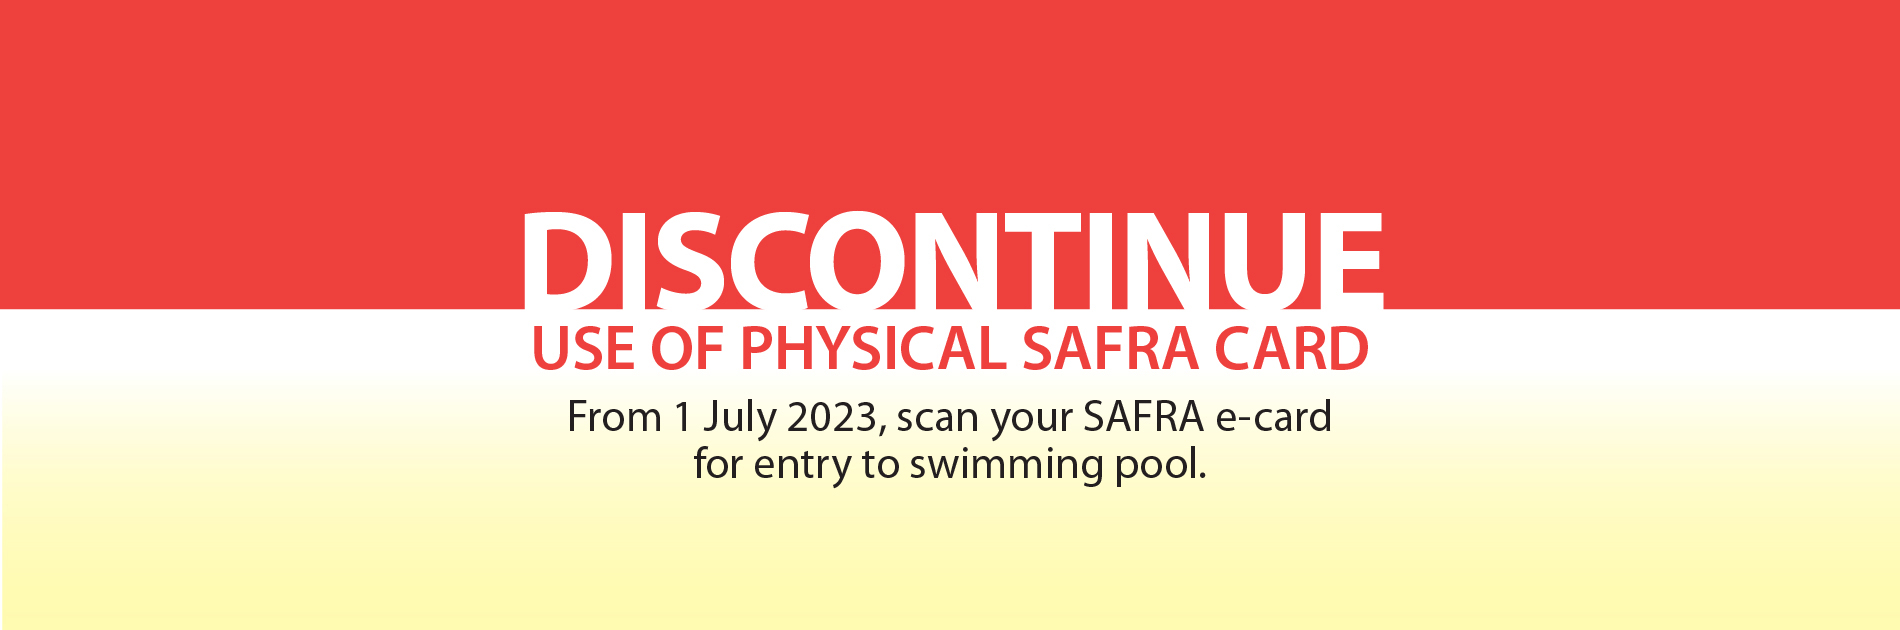 Discontinue-use-of-physical-SAFRA-card-FacilitiesBanner